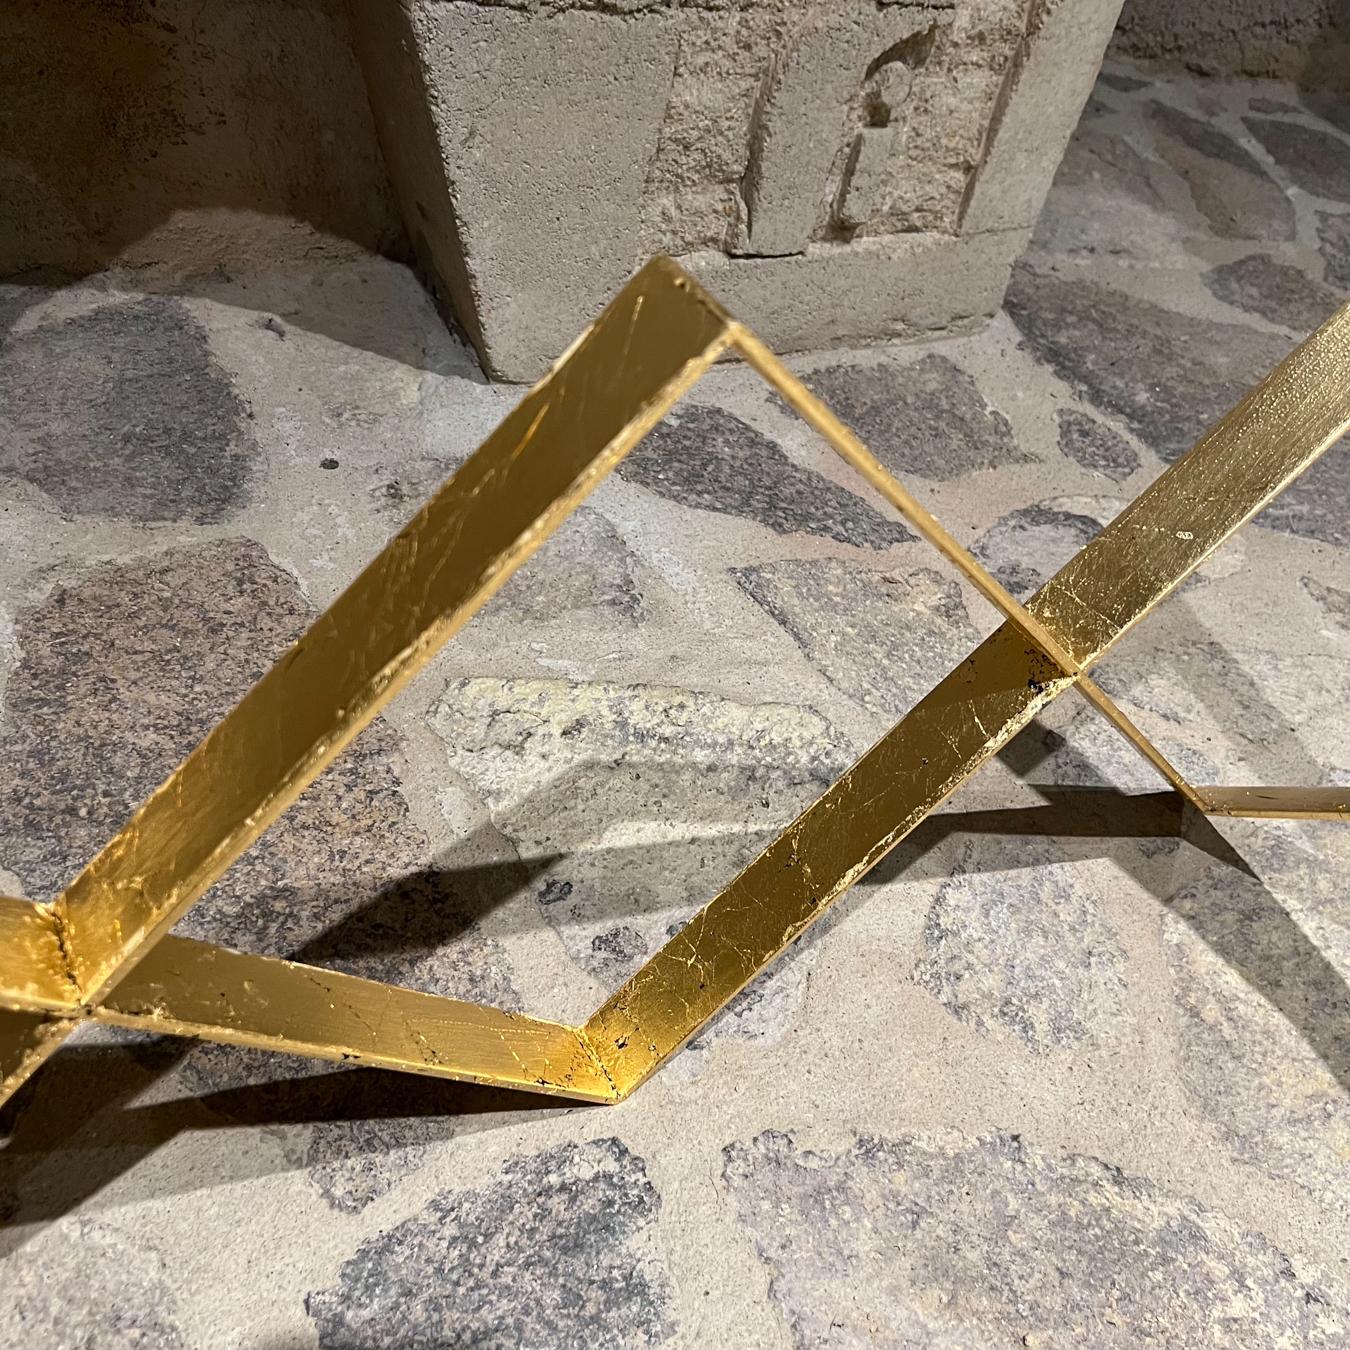 1960s Arturo Pani Stellar Gold Leaf Coffee Table Base Mexico City For Sale 4